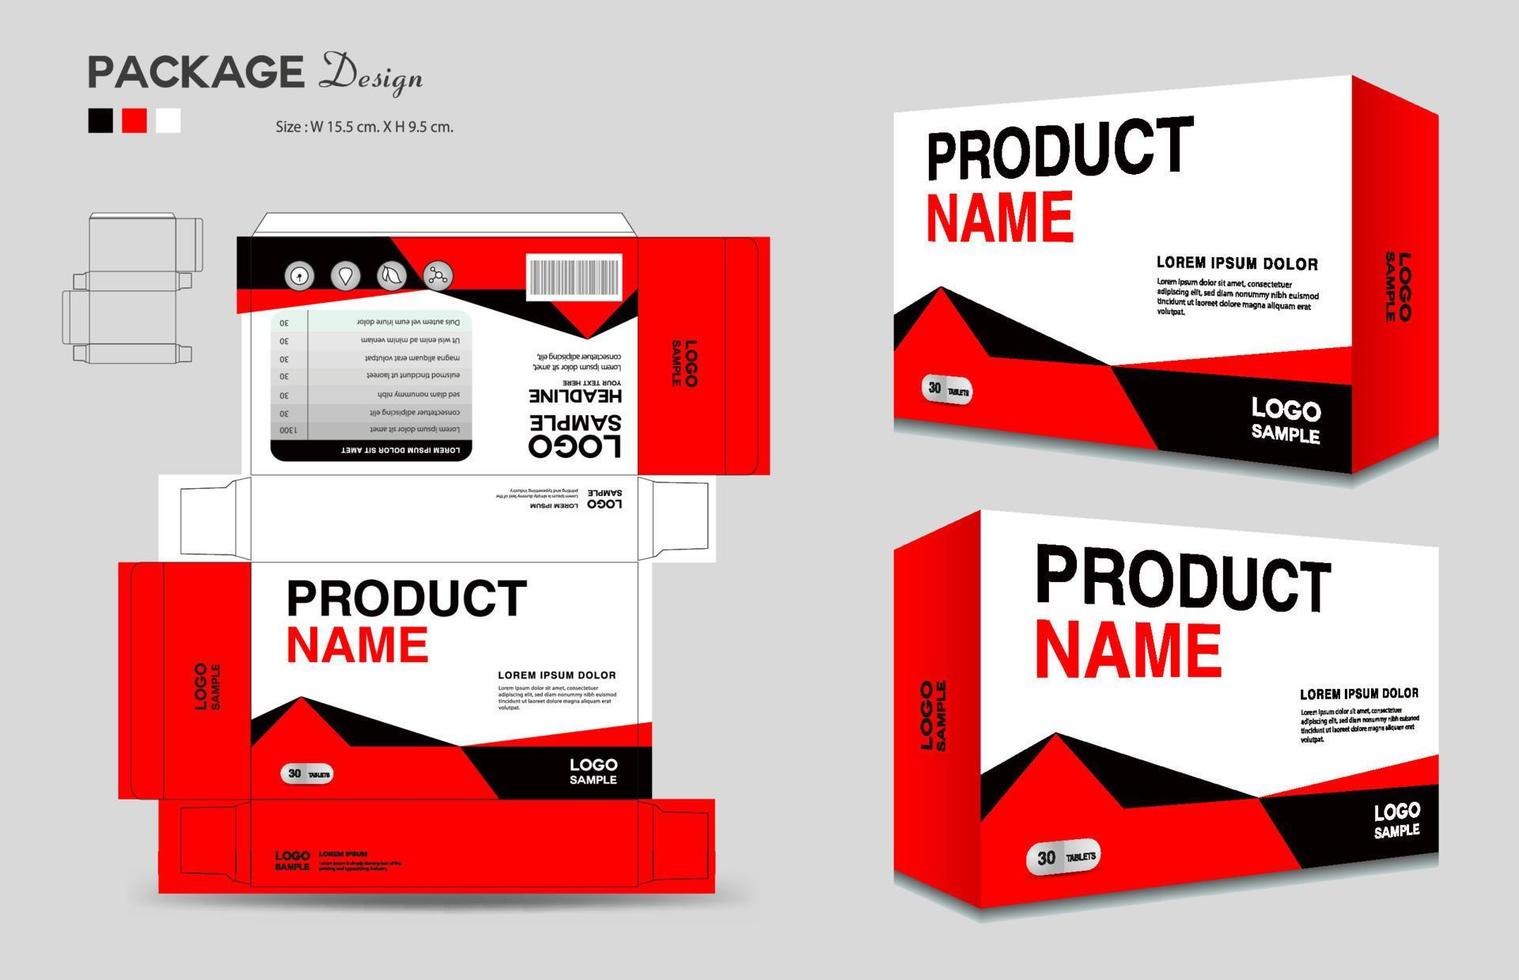 Cosmetic box design, Medical Package design template, Supplements Box Packaging design, Label design, healthcare label, packaging creative idea vector, box outline, 3d box realistic mock-up, vector